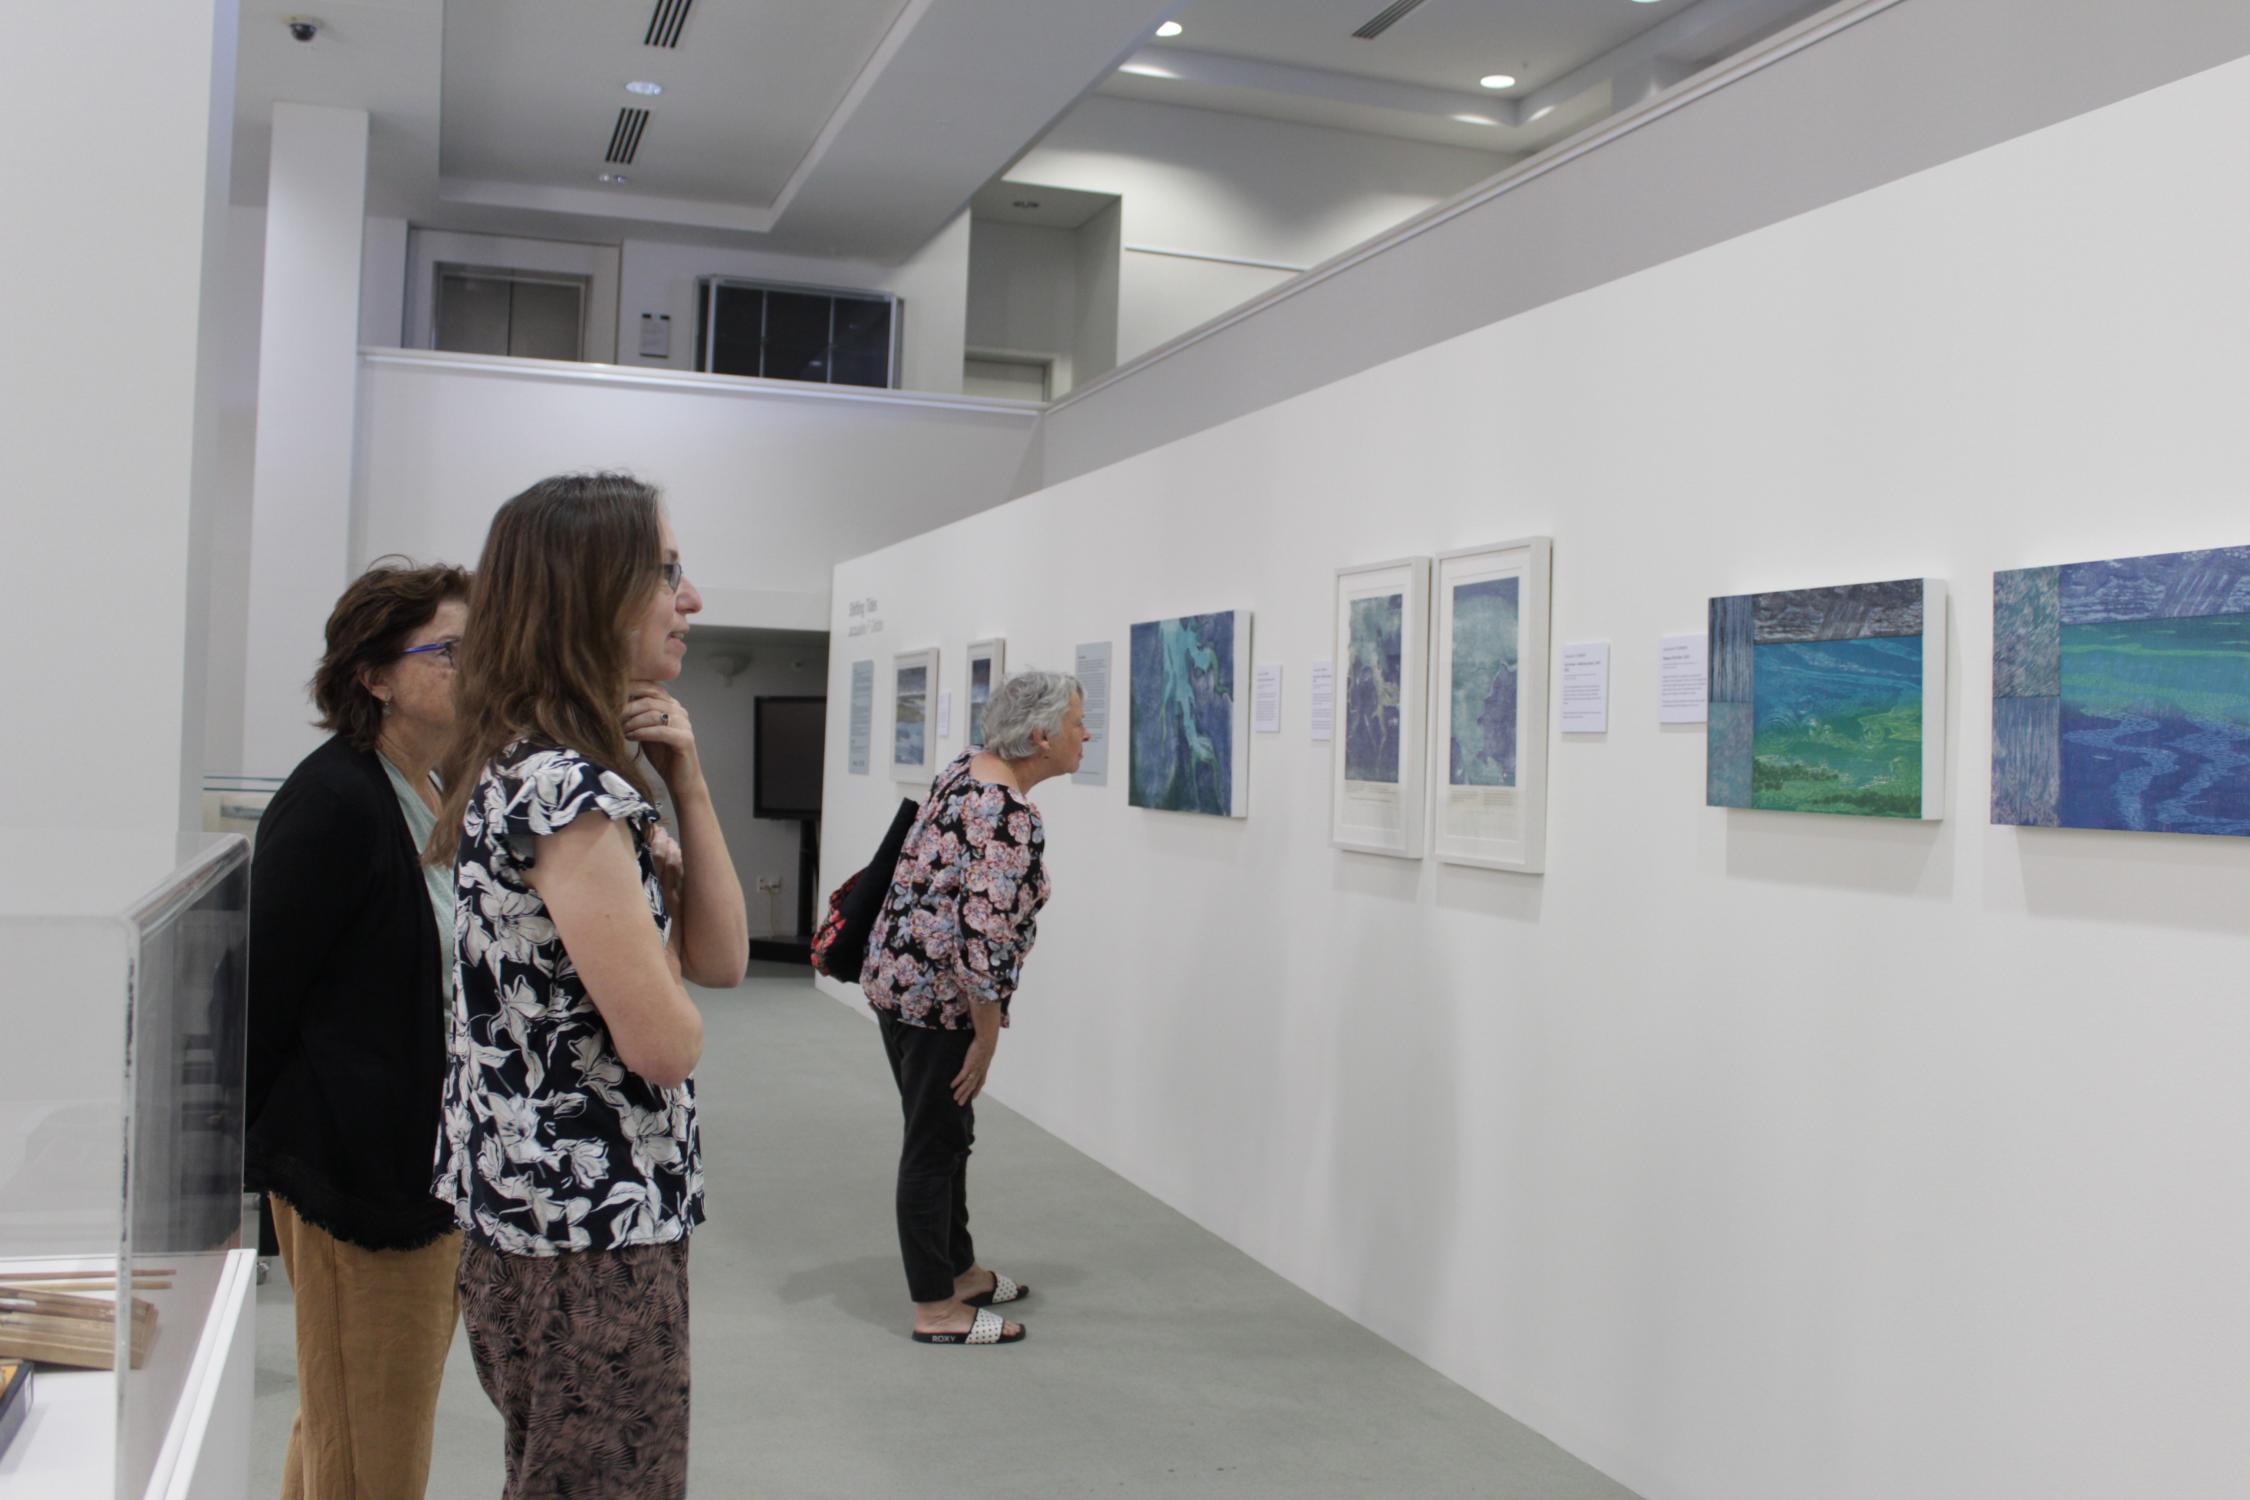 Image of three women standing in a small gallery space looking at artworks on the wall